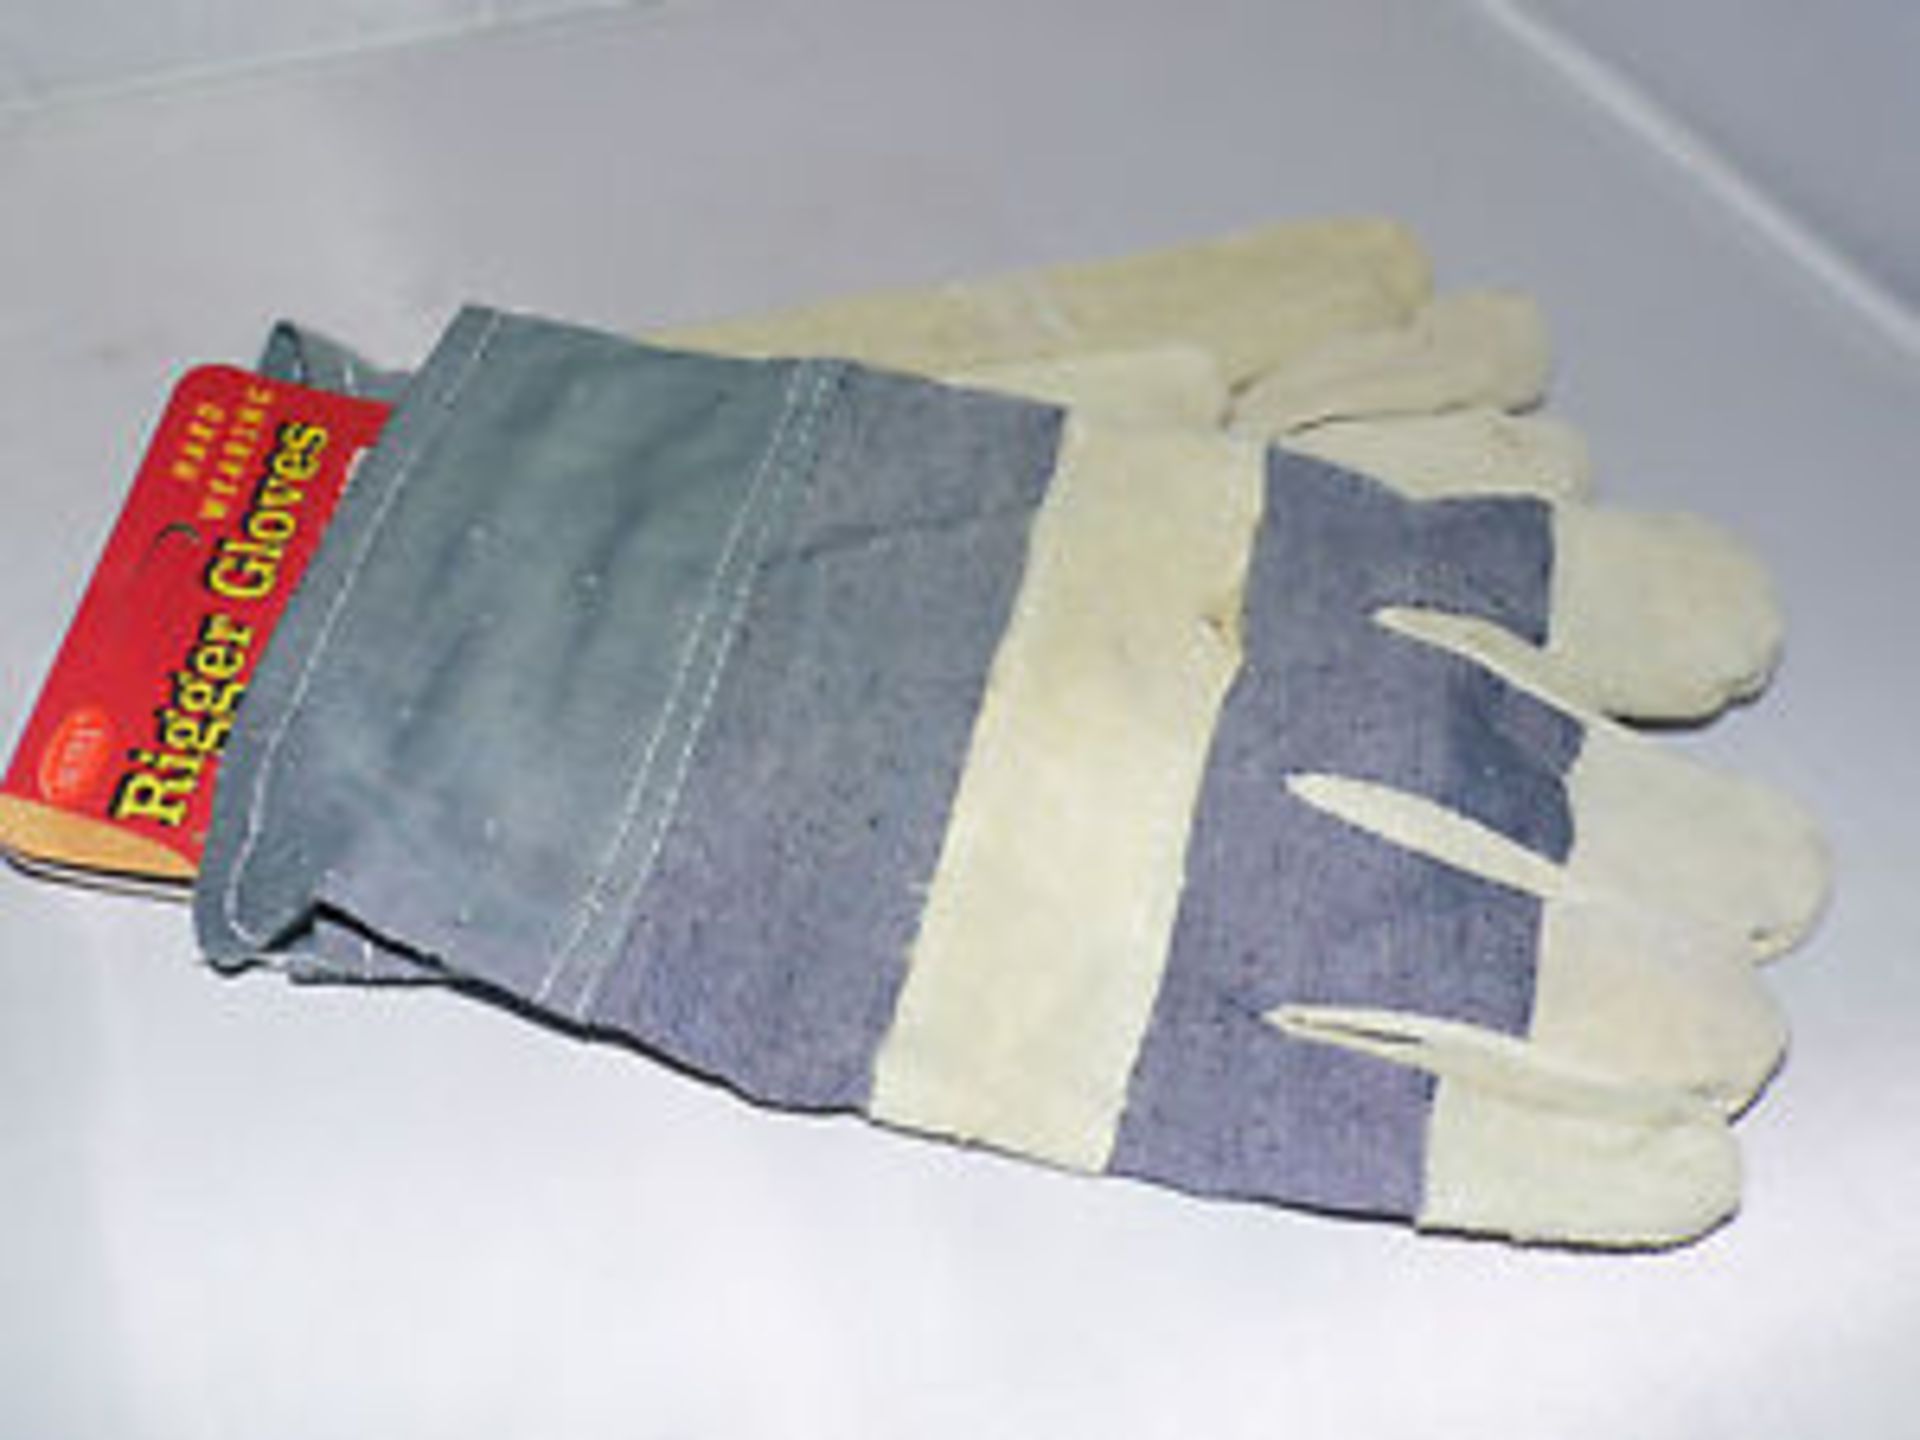 V *TRADE QTY* Brand New 12 Pairs Of Leather Rigger Gloves RRP £59.88 X 5 YOUR BID PRICE TO BE